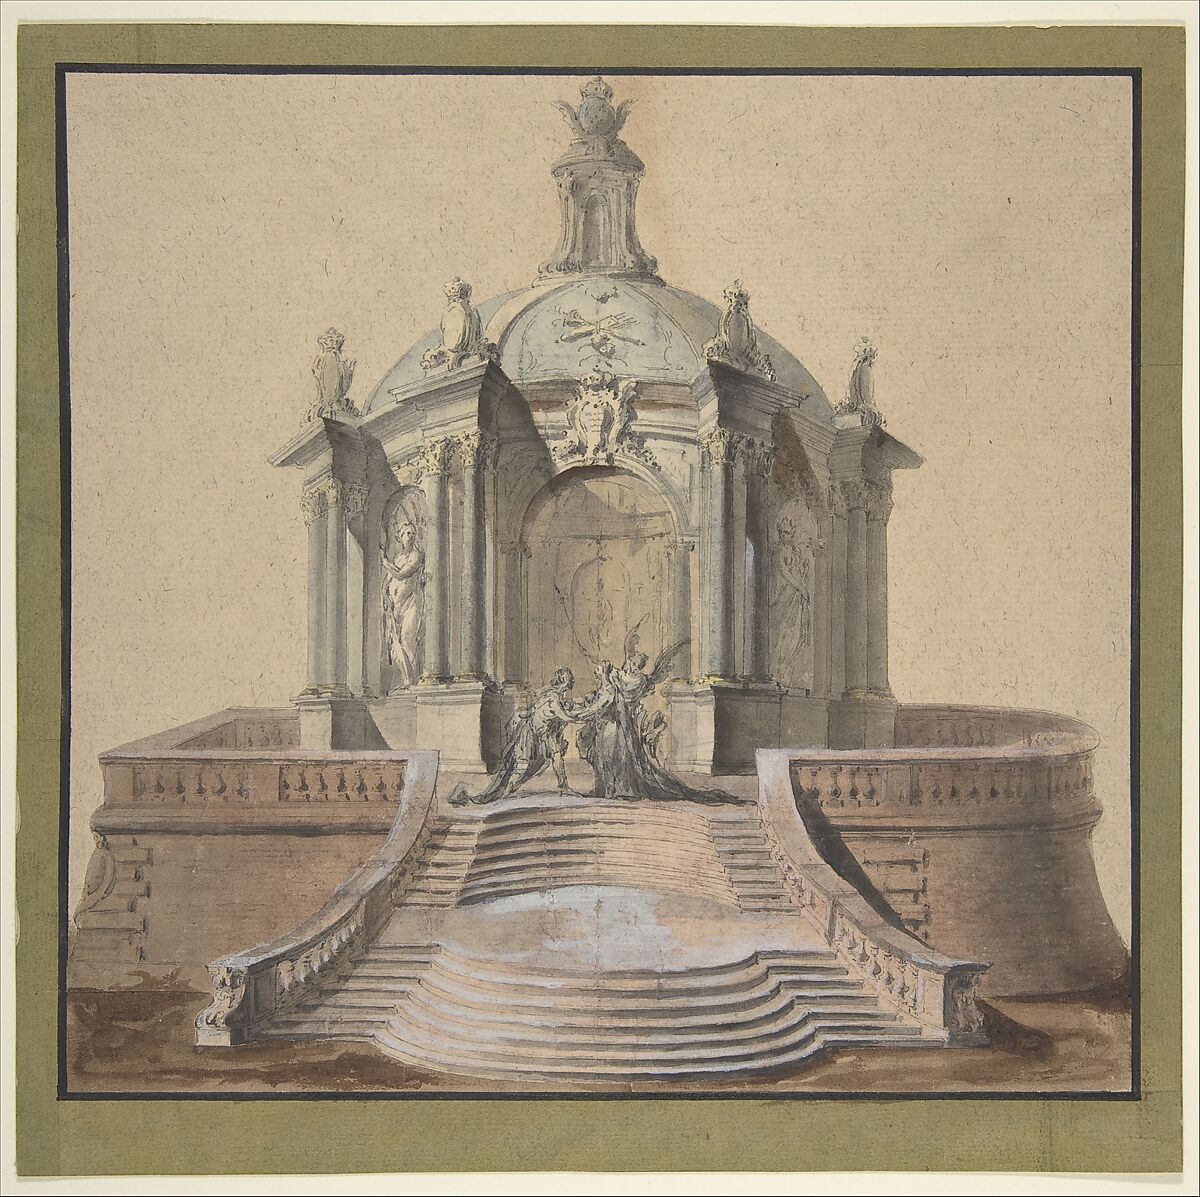 Design for Festival Architecture for an Entry into Paris for the King of Sweden, Frederick I of Hesse, Guillaume Thomas Raphaël Taraval (French, Paris 1701–1750 Stockholm), Pen and brown ink, brush and colored washes, heightened with white 